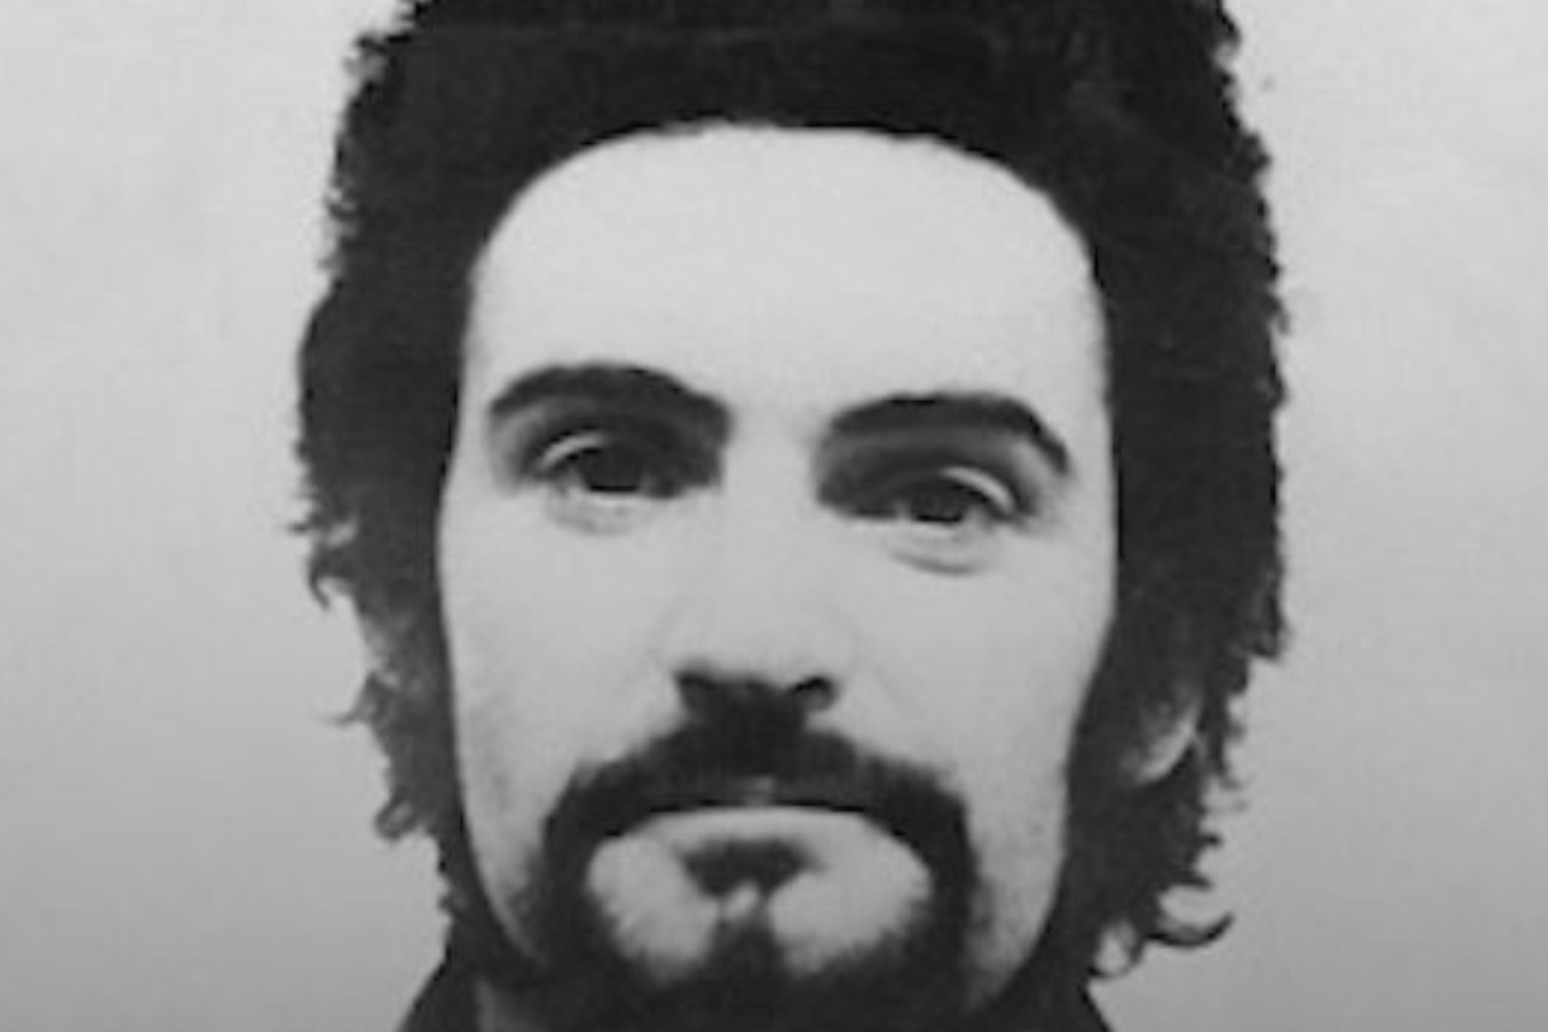 Yorkshire Ripper Peter Sutcliffe dies in hospital aged 74 